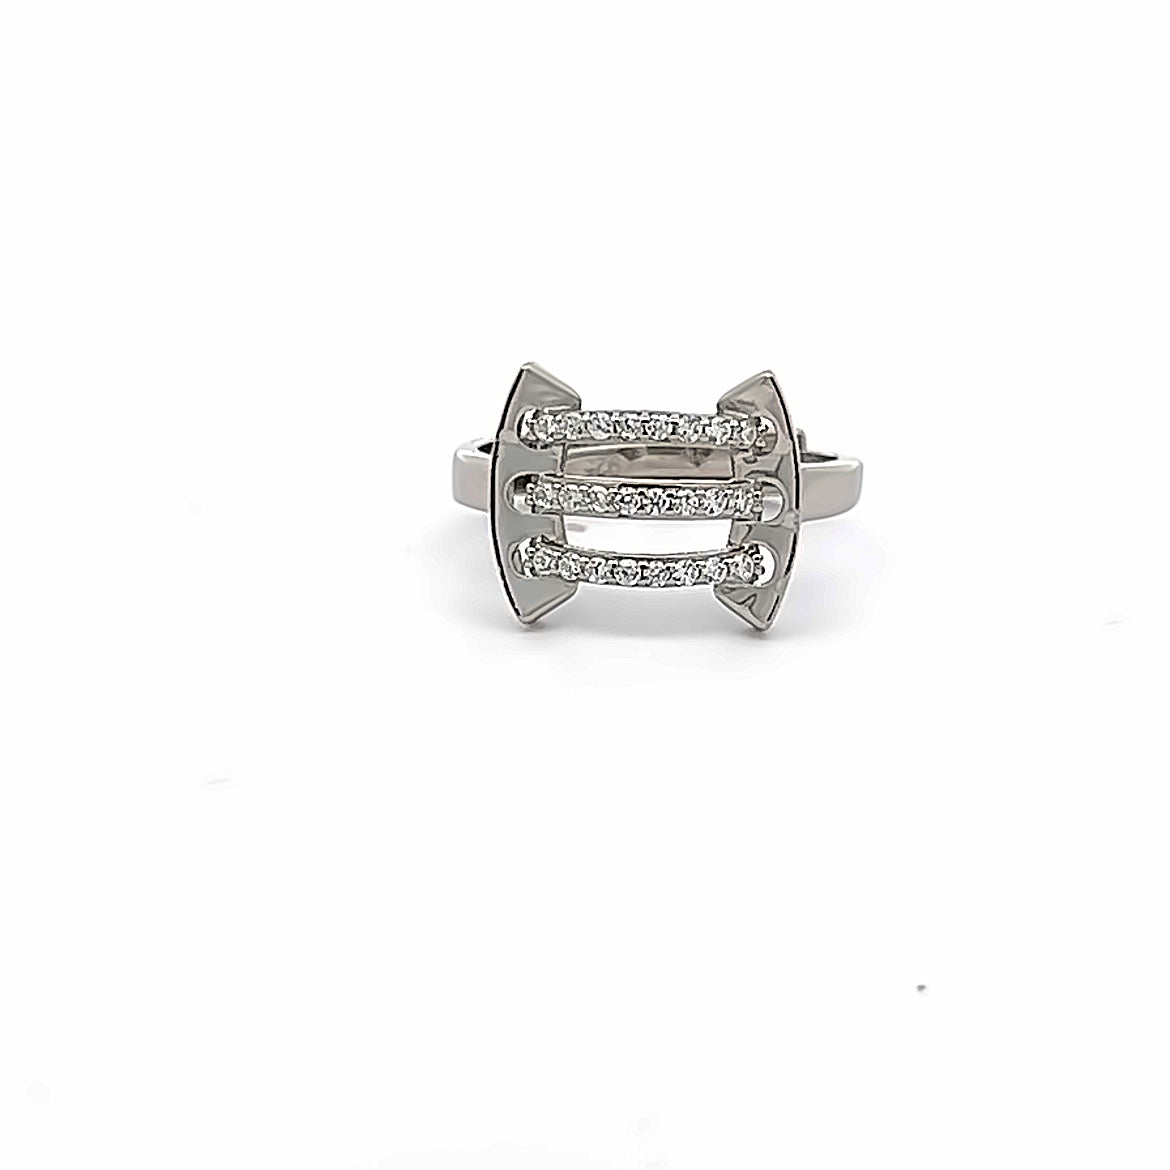 Classic Sterling Silver Ring